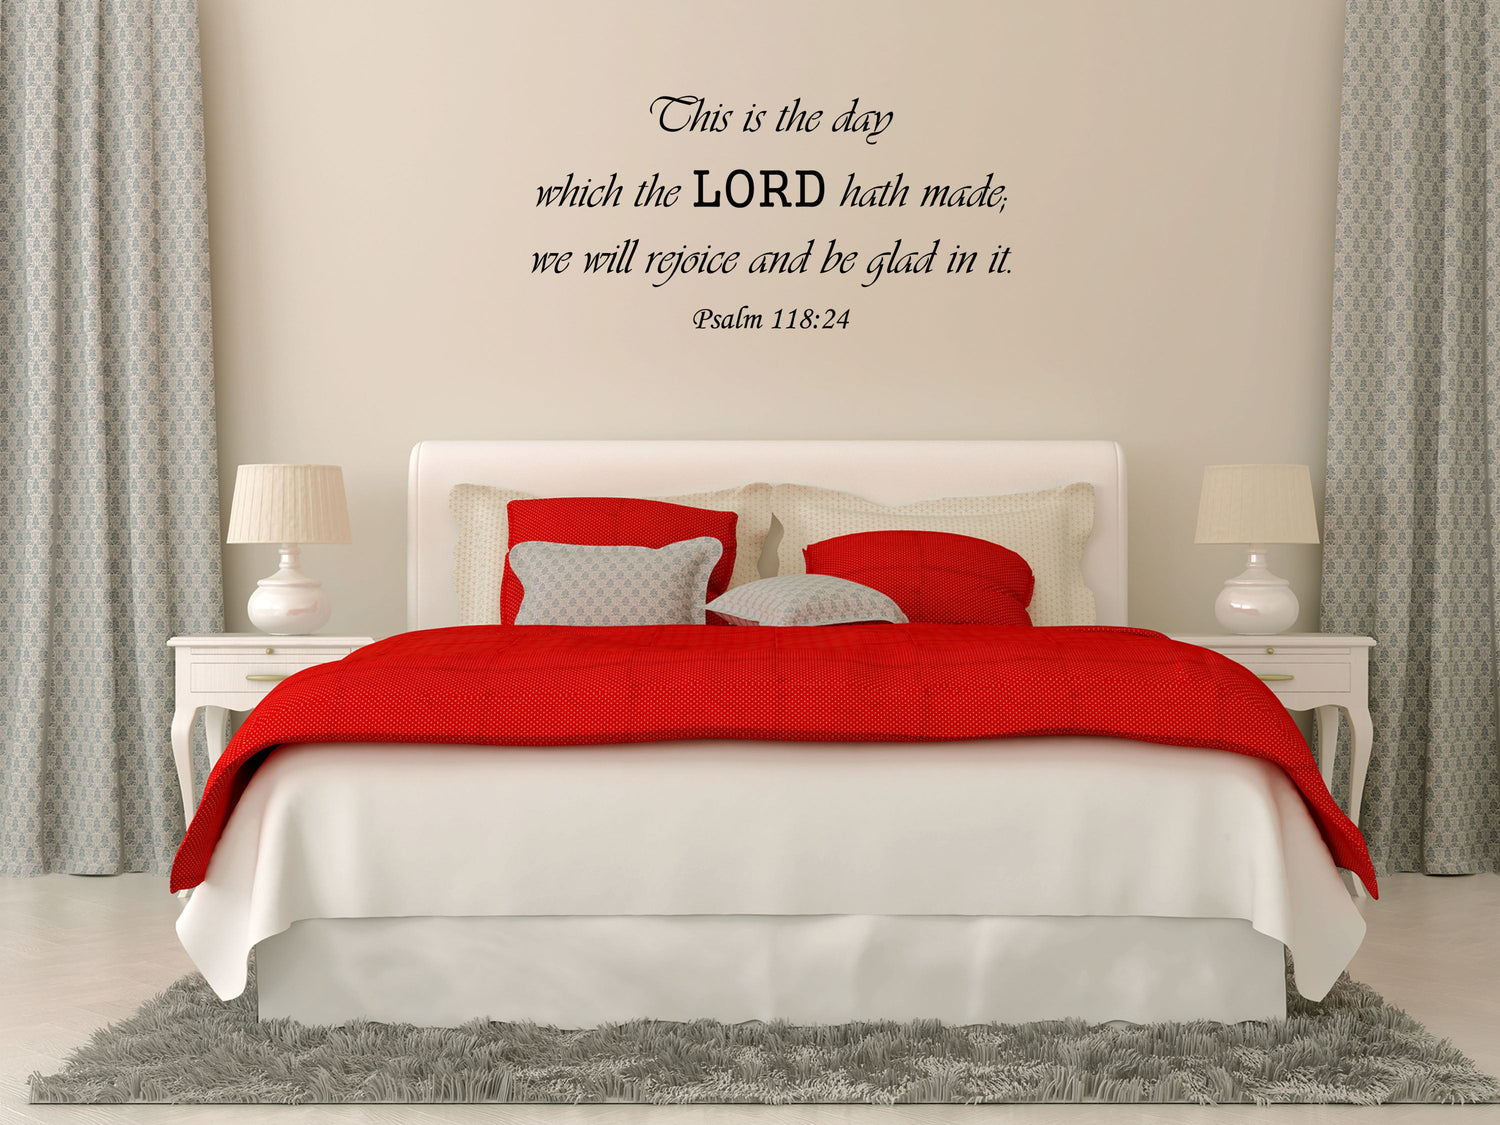 Psalm 118:24 - Scripture Wall Quote Décor Decal Vinyl Wall Decal Inspirational Wall Signs 